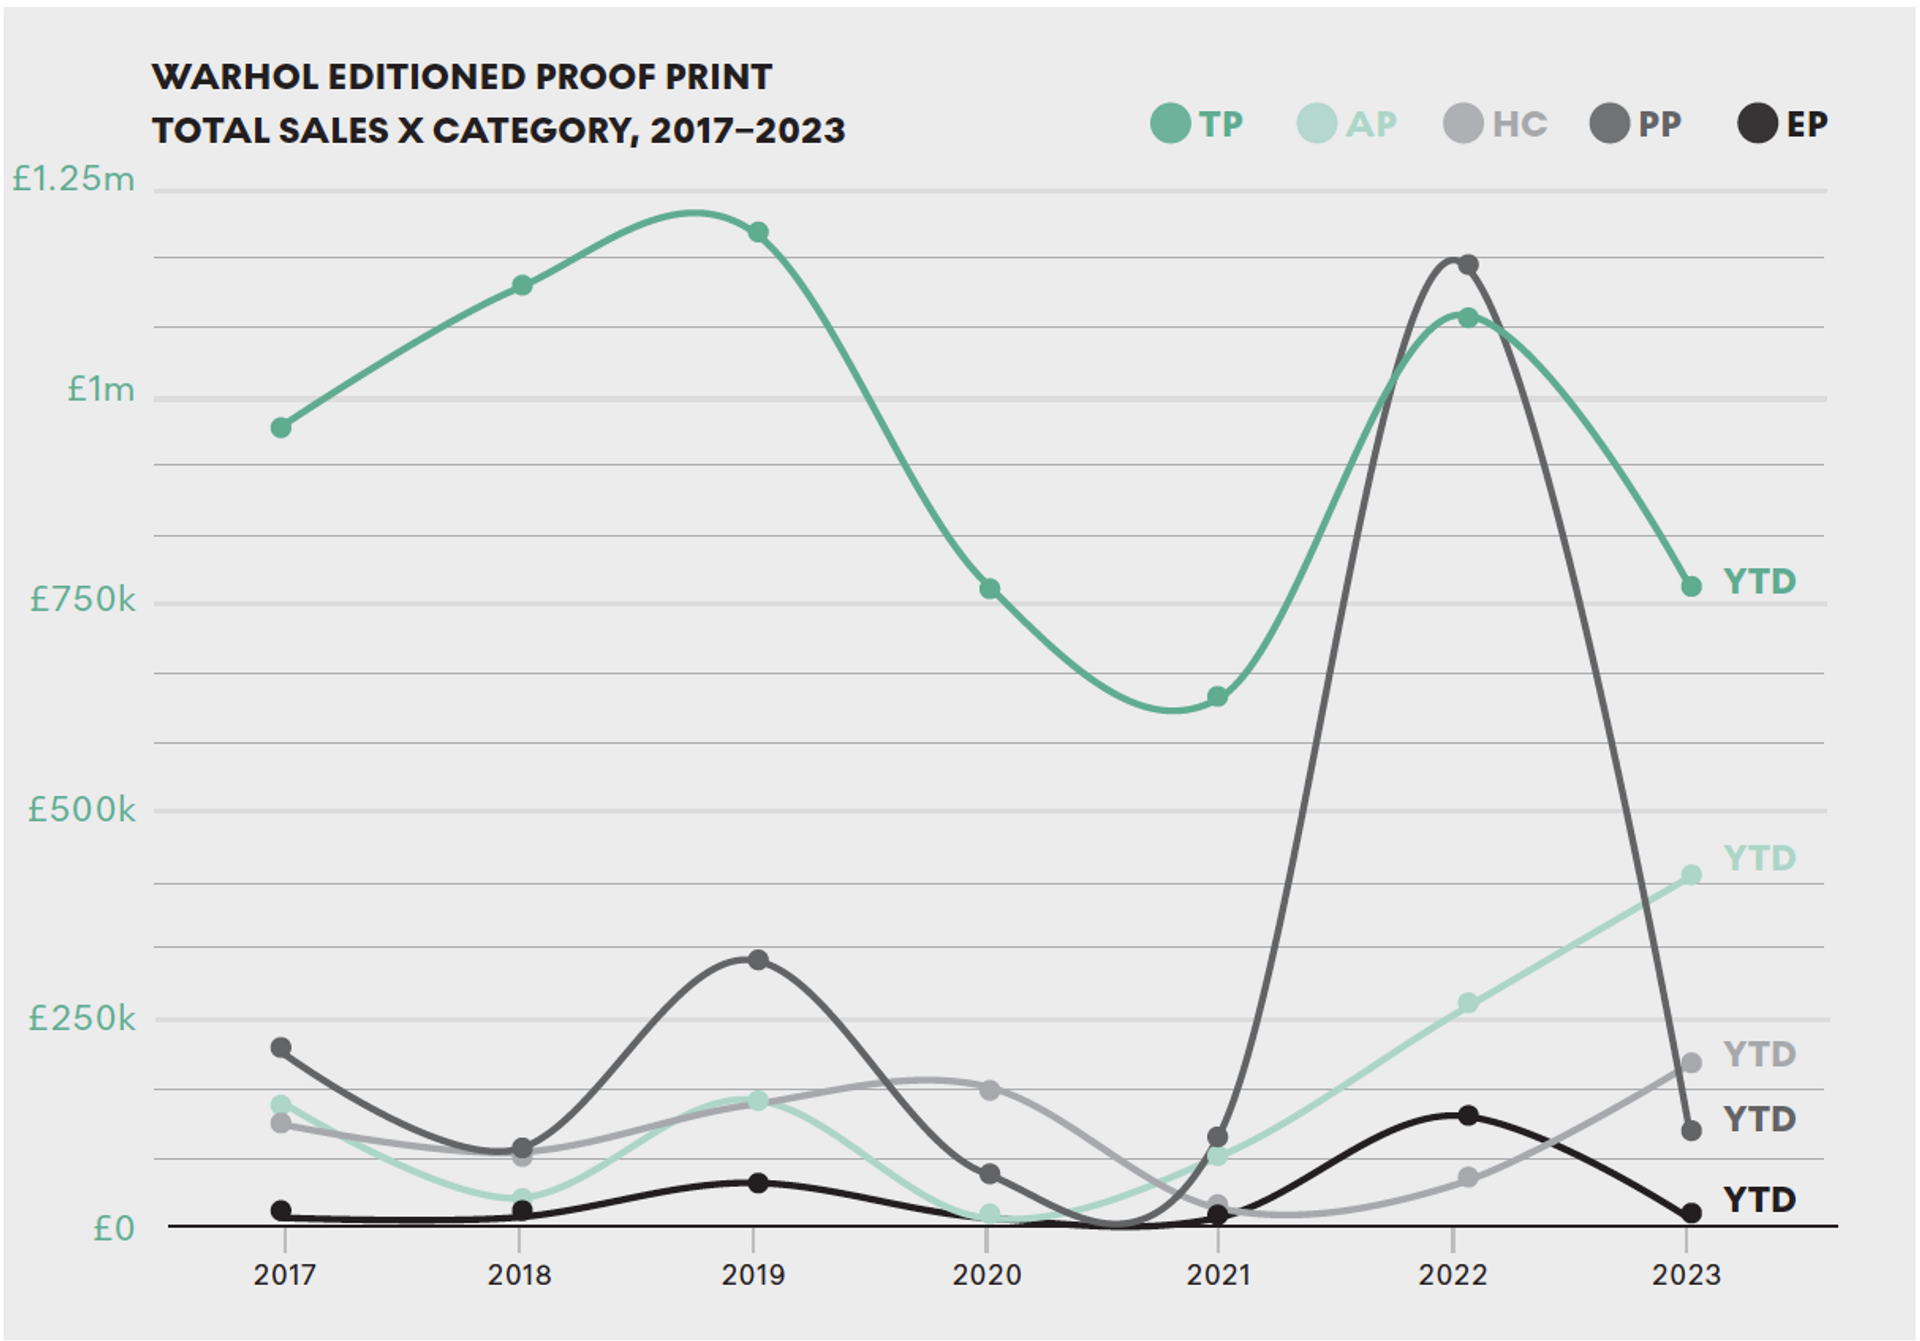 A line graph showing the total sales turnover of Andy Warhol's five different editioned proof print categories over the last five-year period. 